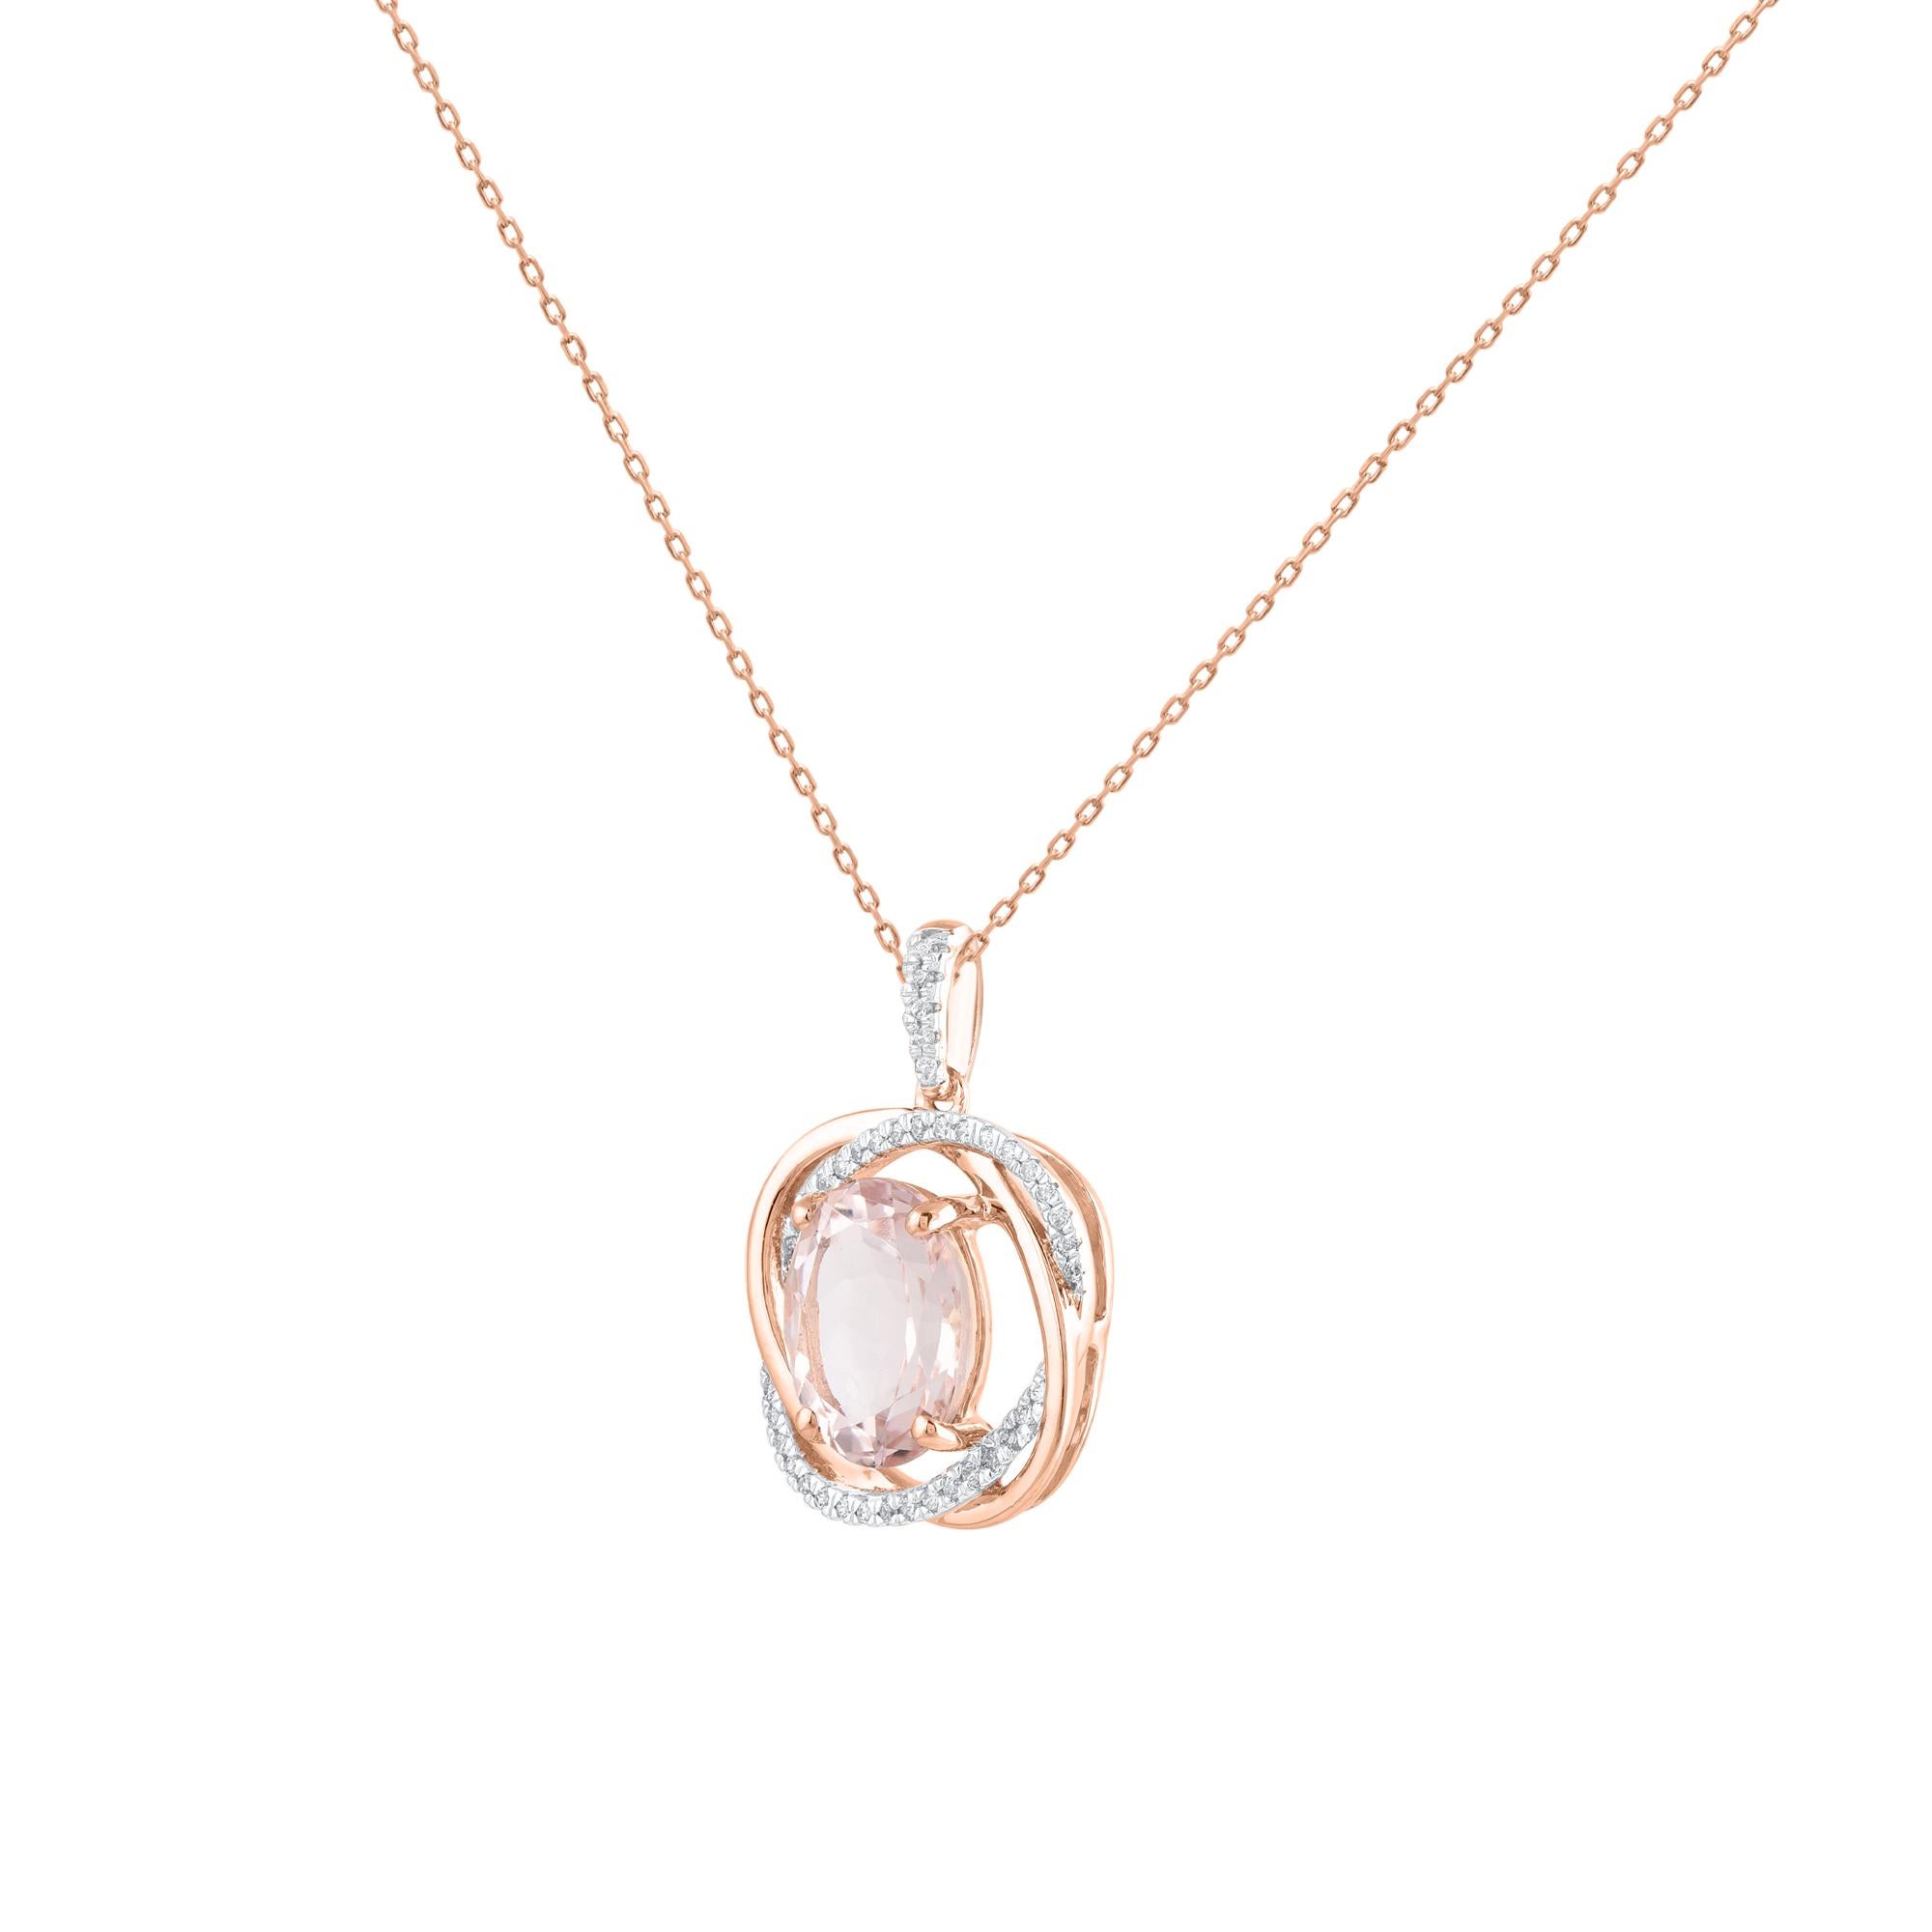 Make a bold statement of style and beliefs with the eye-catching elegance of this morganite gemstone pendant.  Beautifully crafted by our inhouse experts in 14 karat white gold and embellished with 41 round diamond and 1 morganite in set in prong